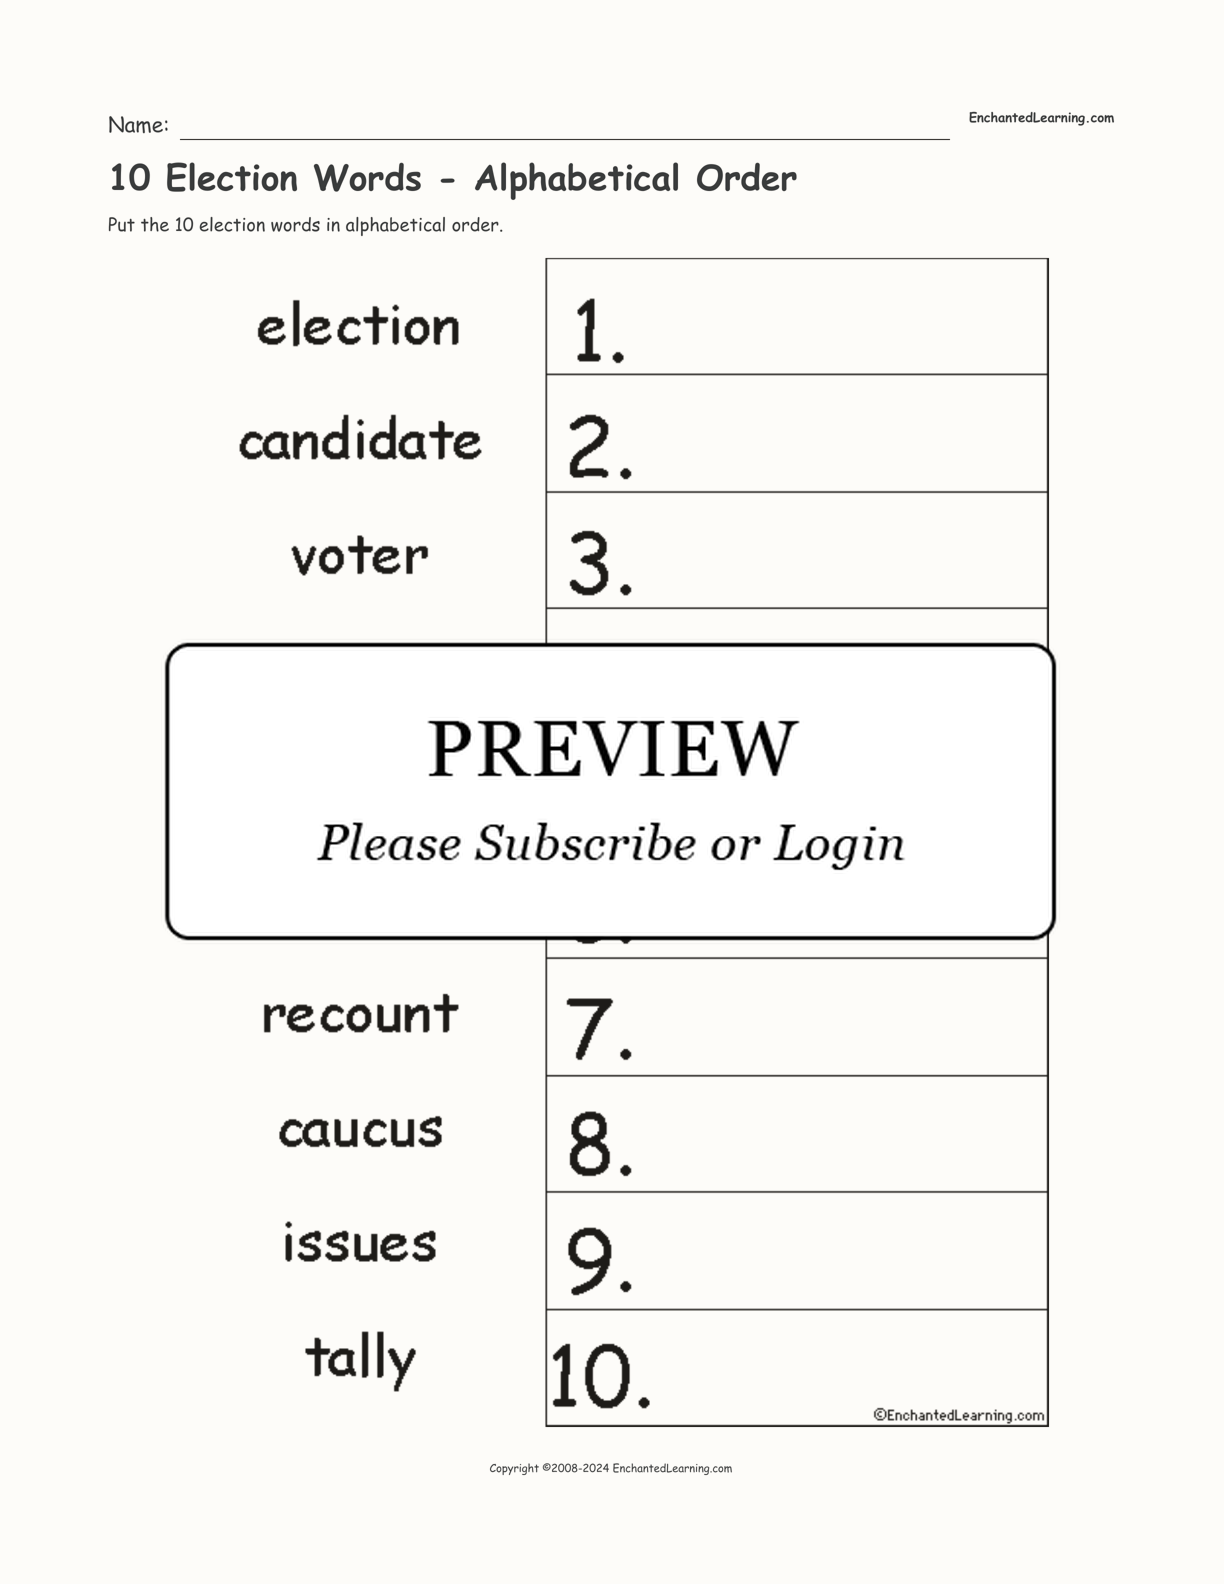 10 Election Words - Alphabetical Order interactive worksheet page 1